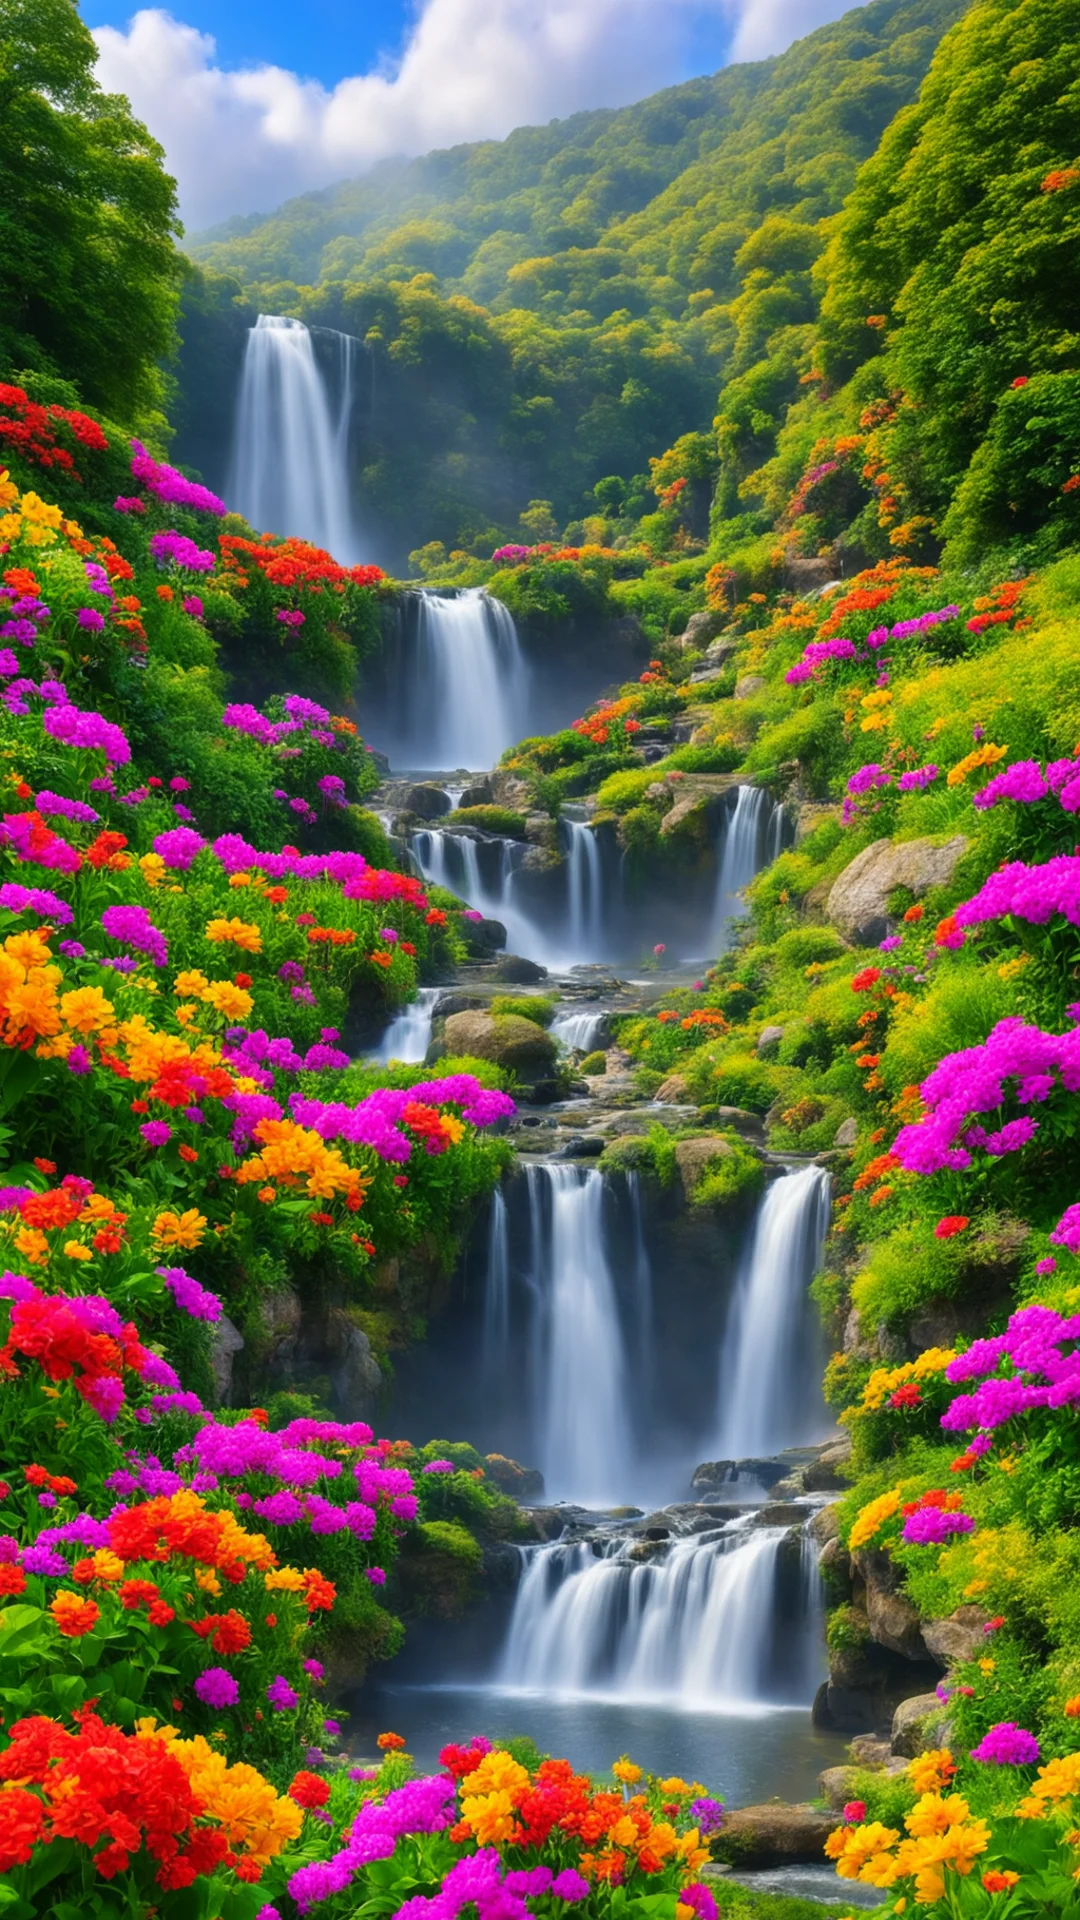 beautiful cottage colourful flowers of all colours red green blue yellows oranges rolling hills beautiful waterfalls stunning scenery giant planet in the sky amazing awesome portrait 2 tall